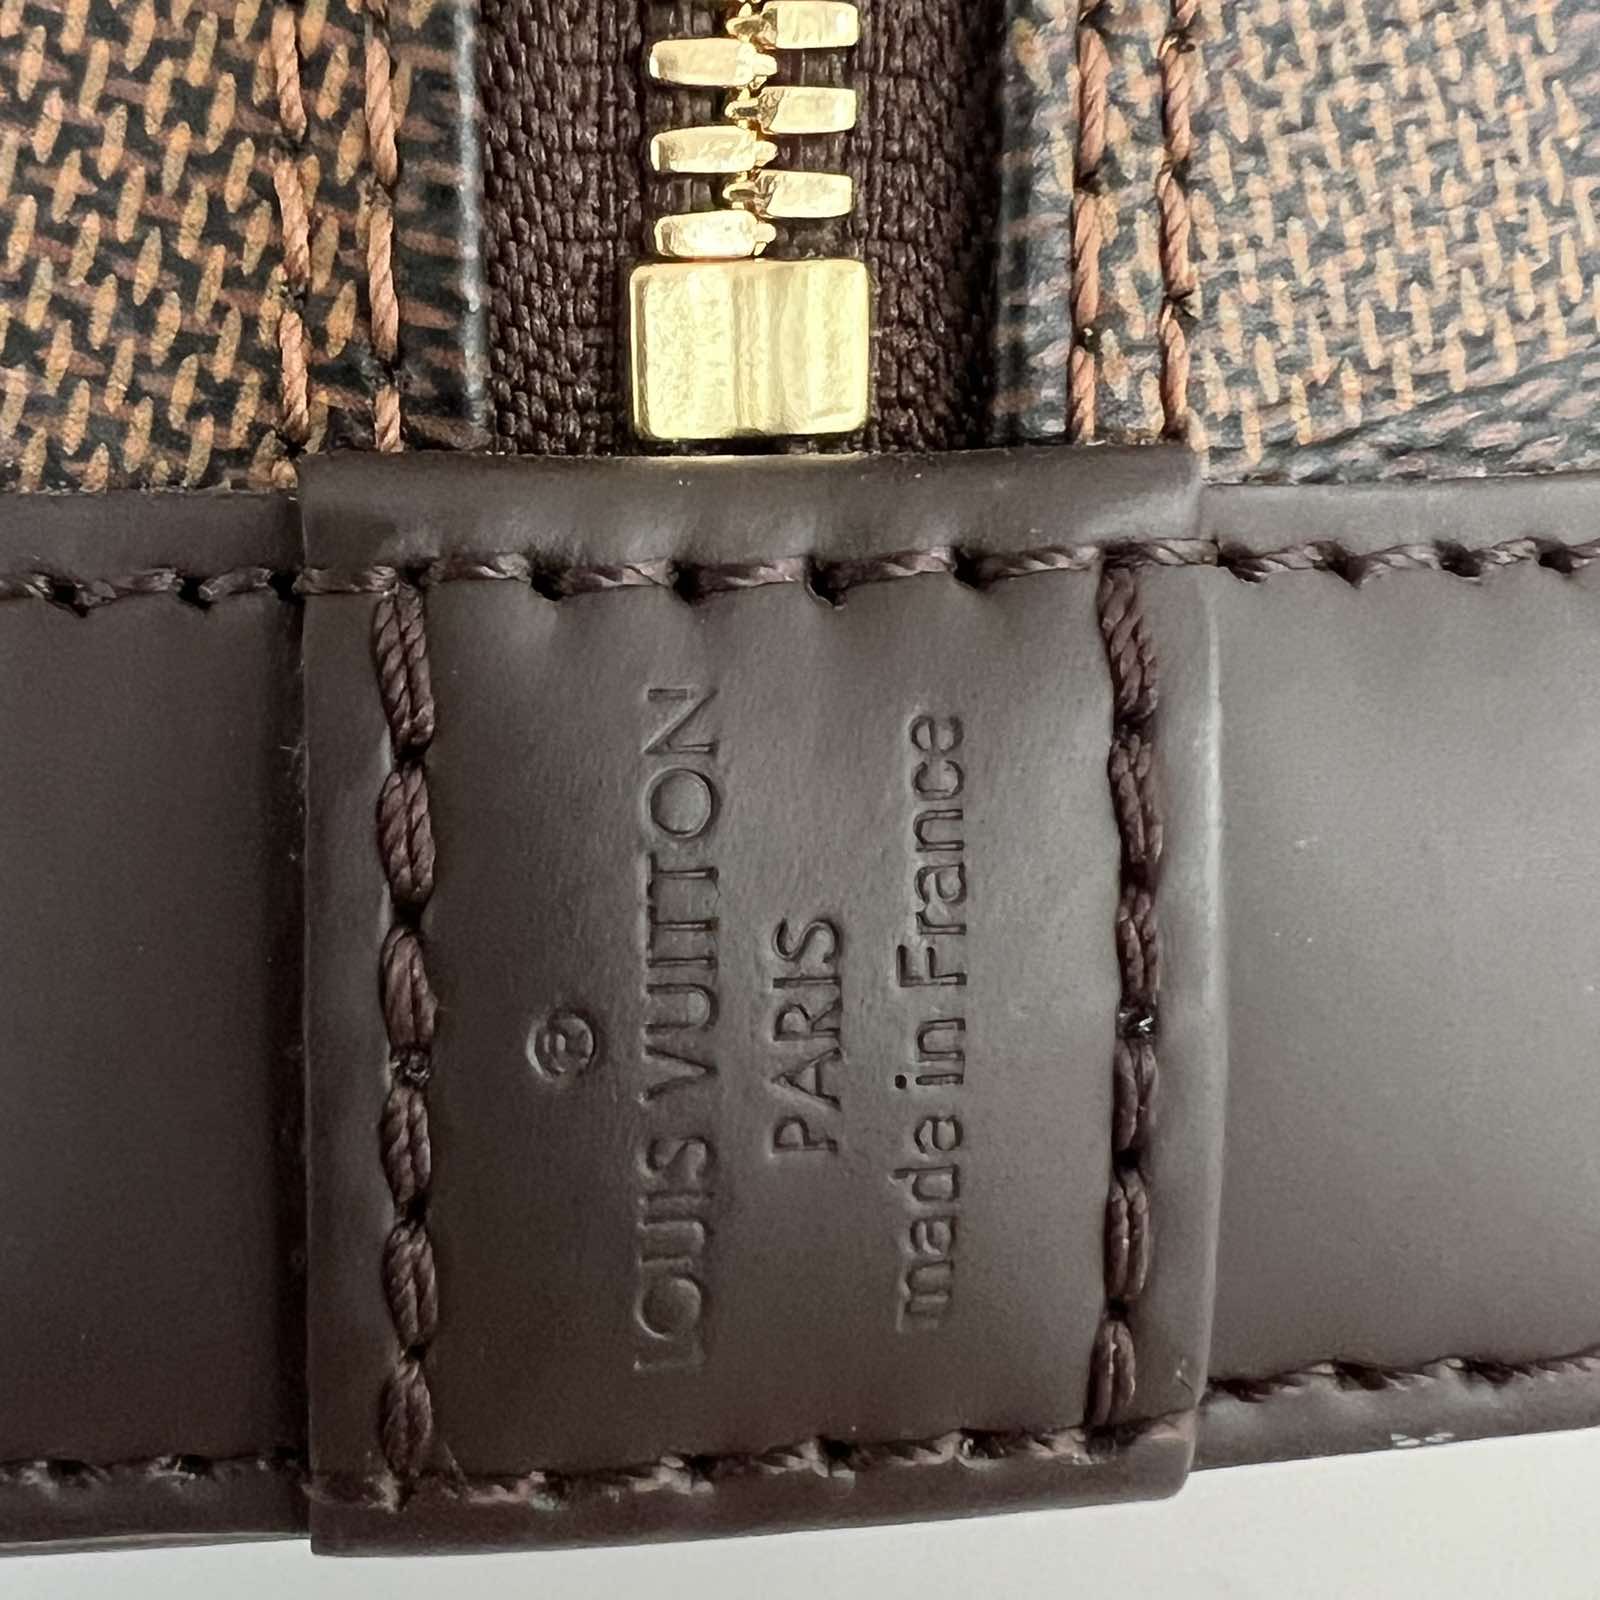 Louis Vuitton Alma BB, genuine leather, with box ⋆ ALIFINDS.NET